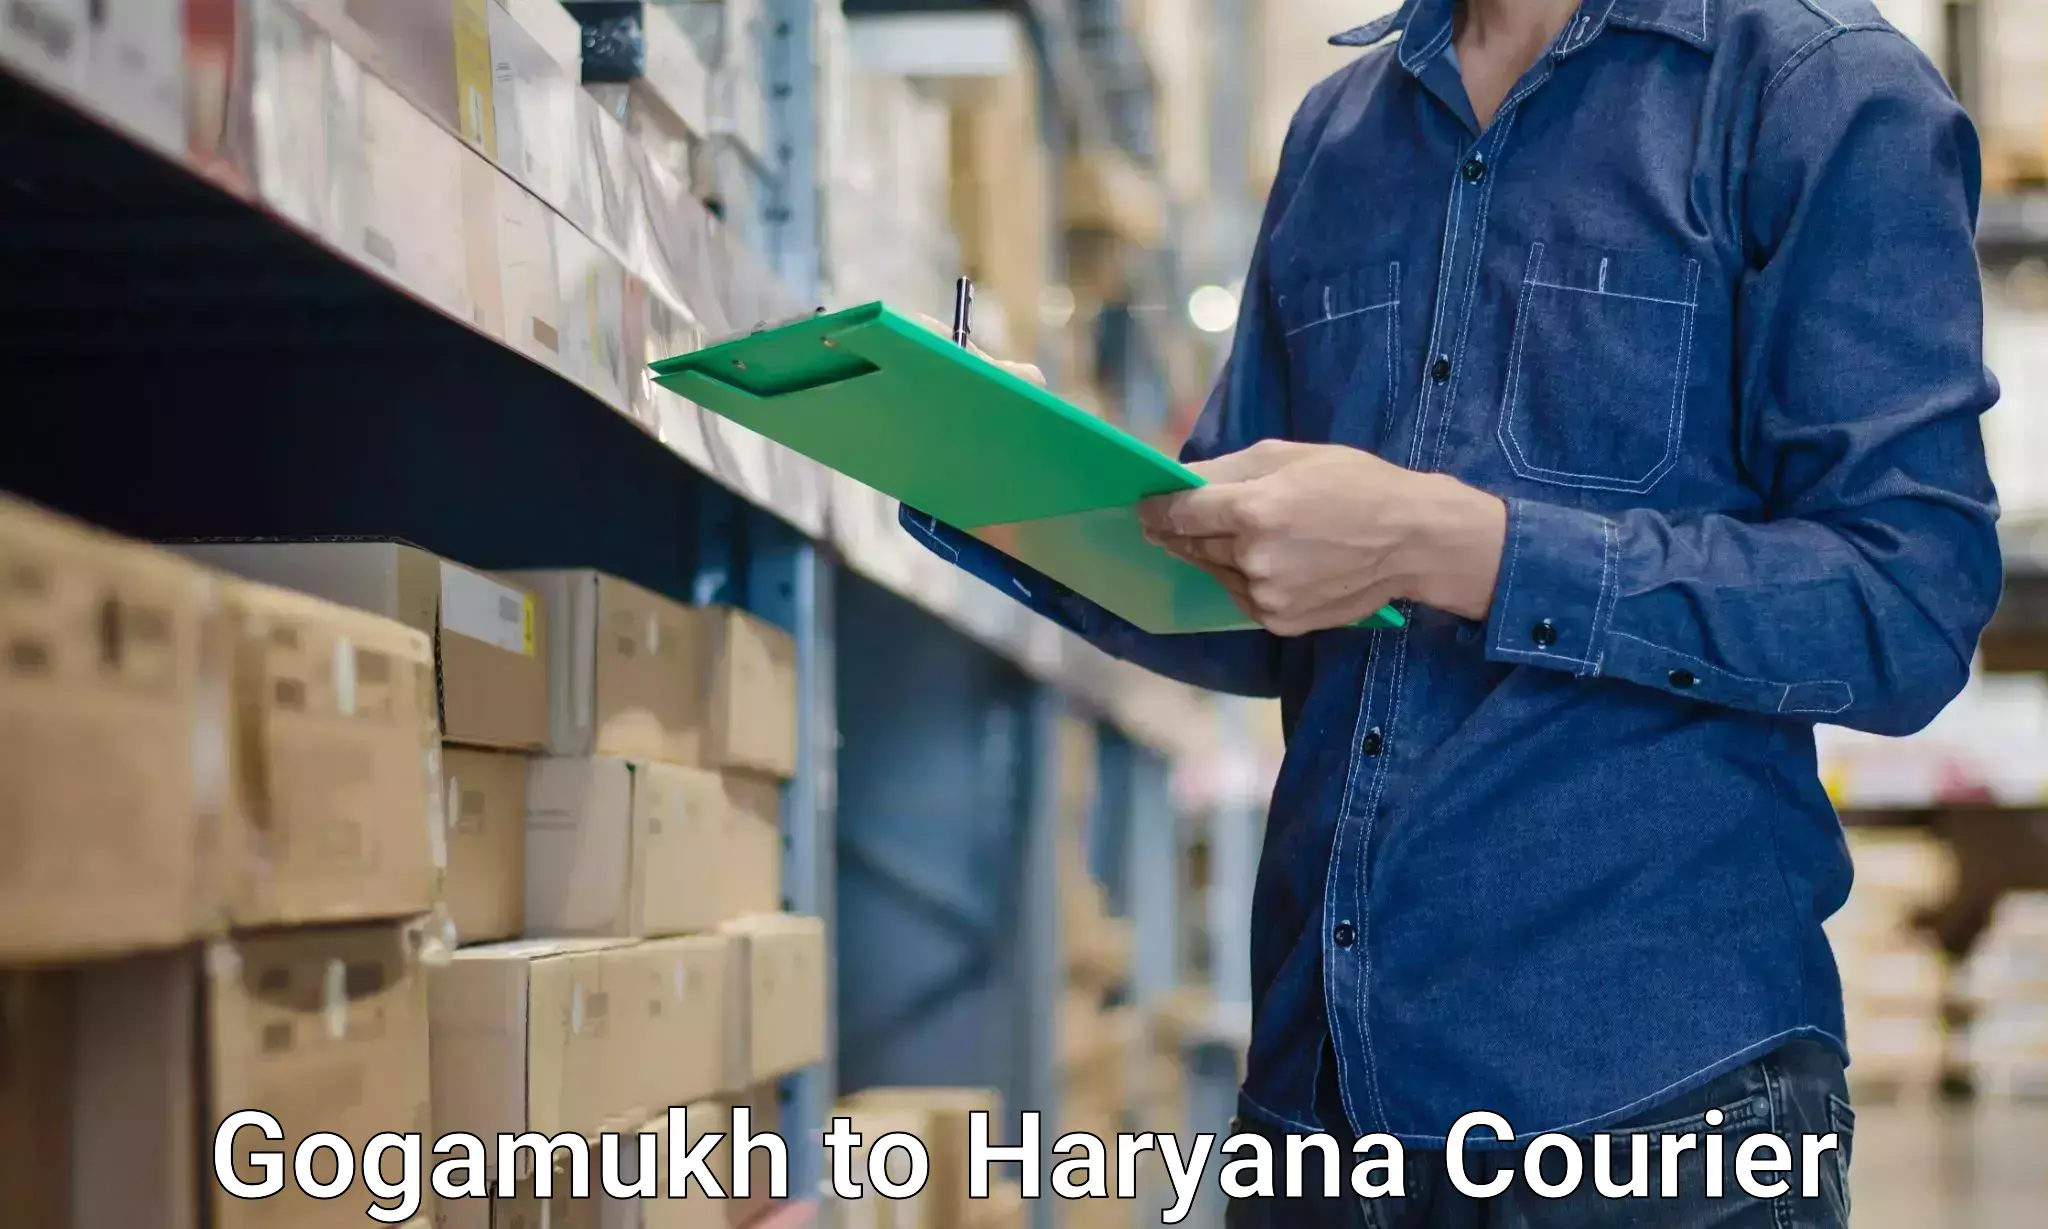 Quality relocation services Gogamukh to Dharuhera